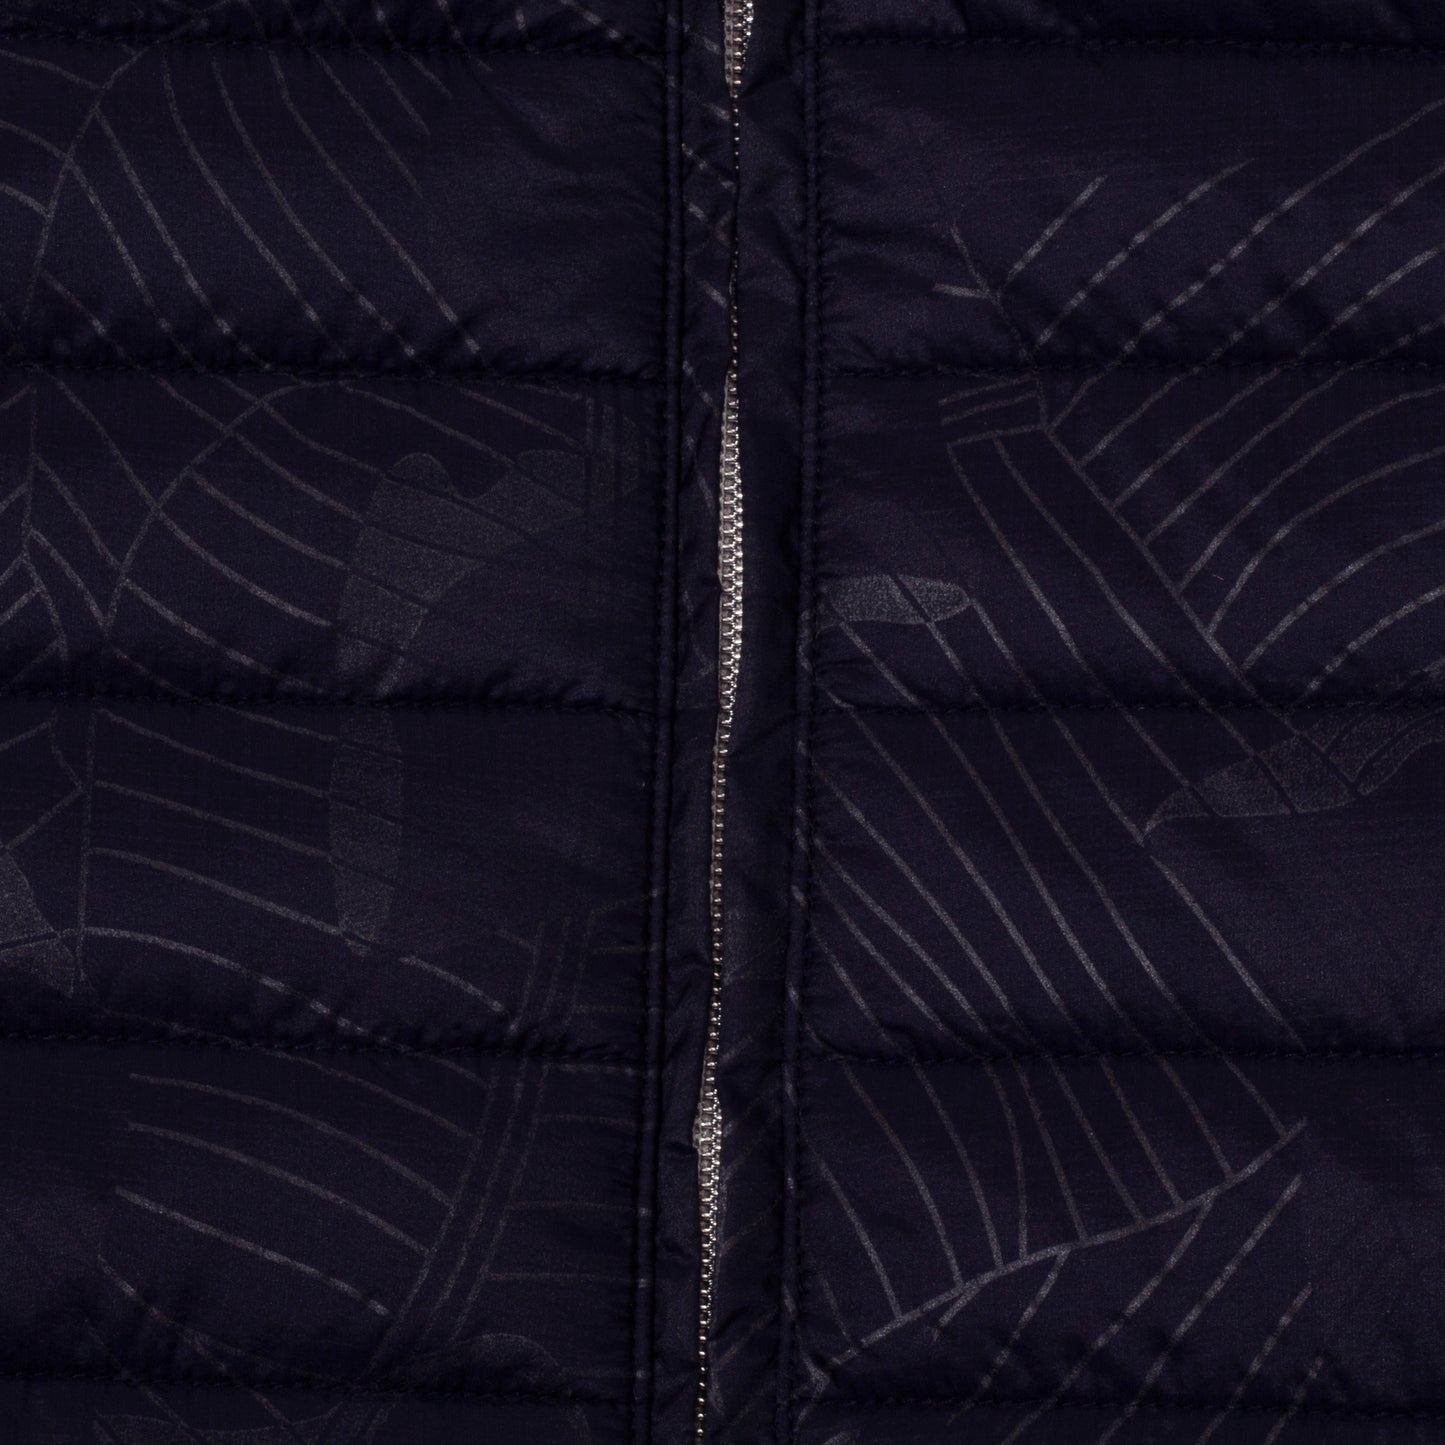 Green Lamb Ladies Quilted Jacket with Stretch Panels in Navy Reflective Print